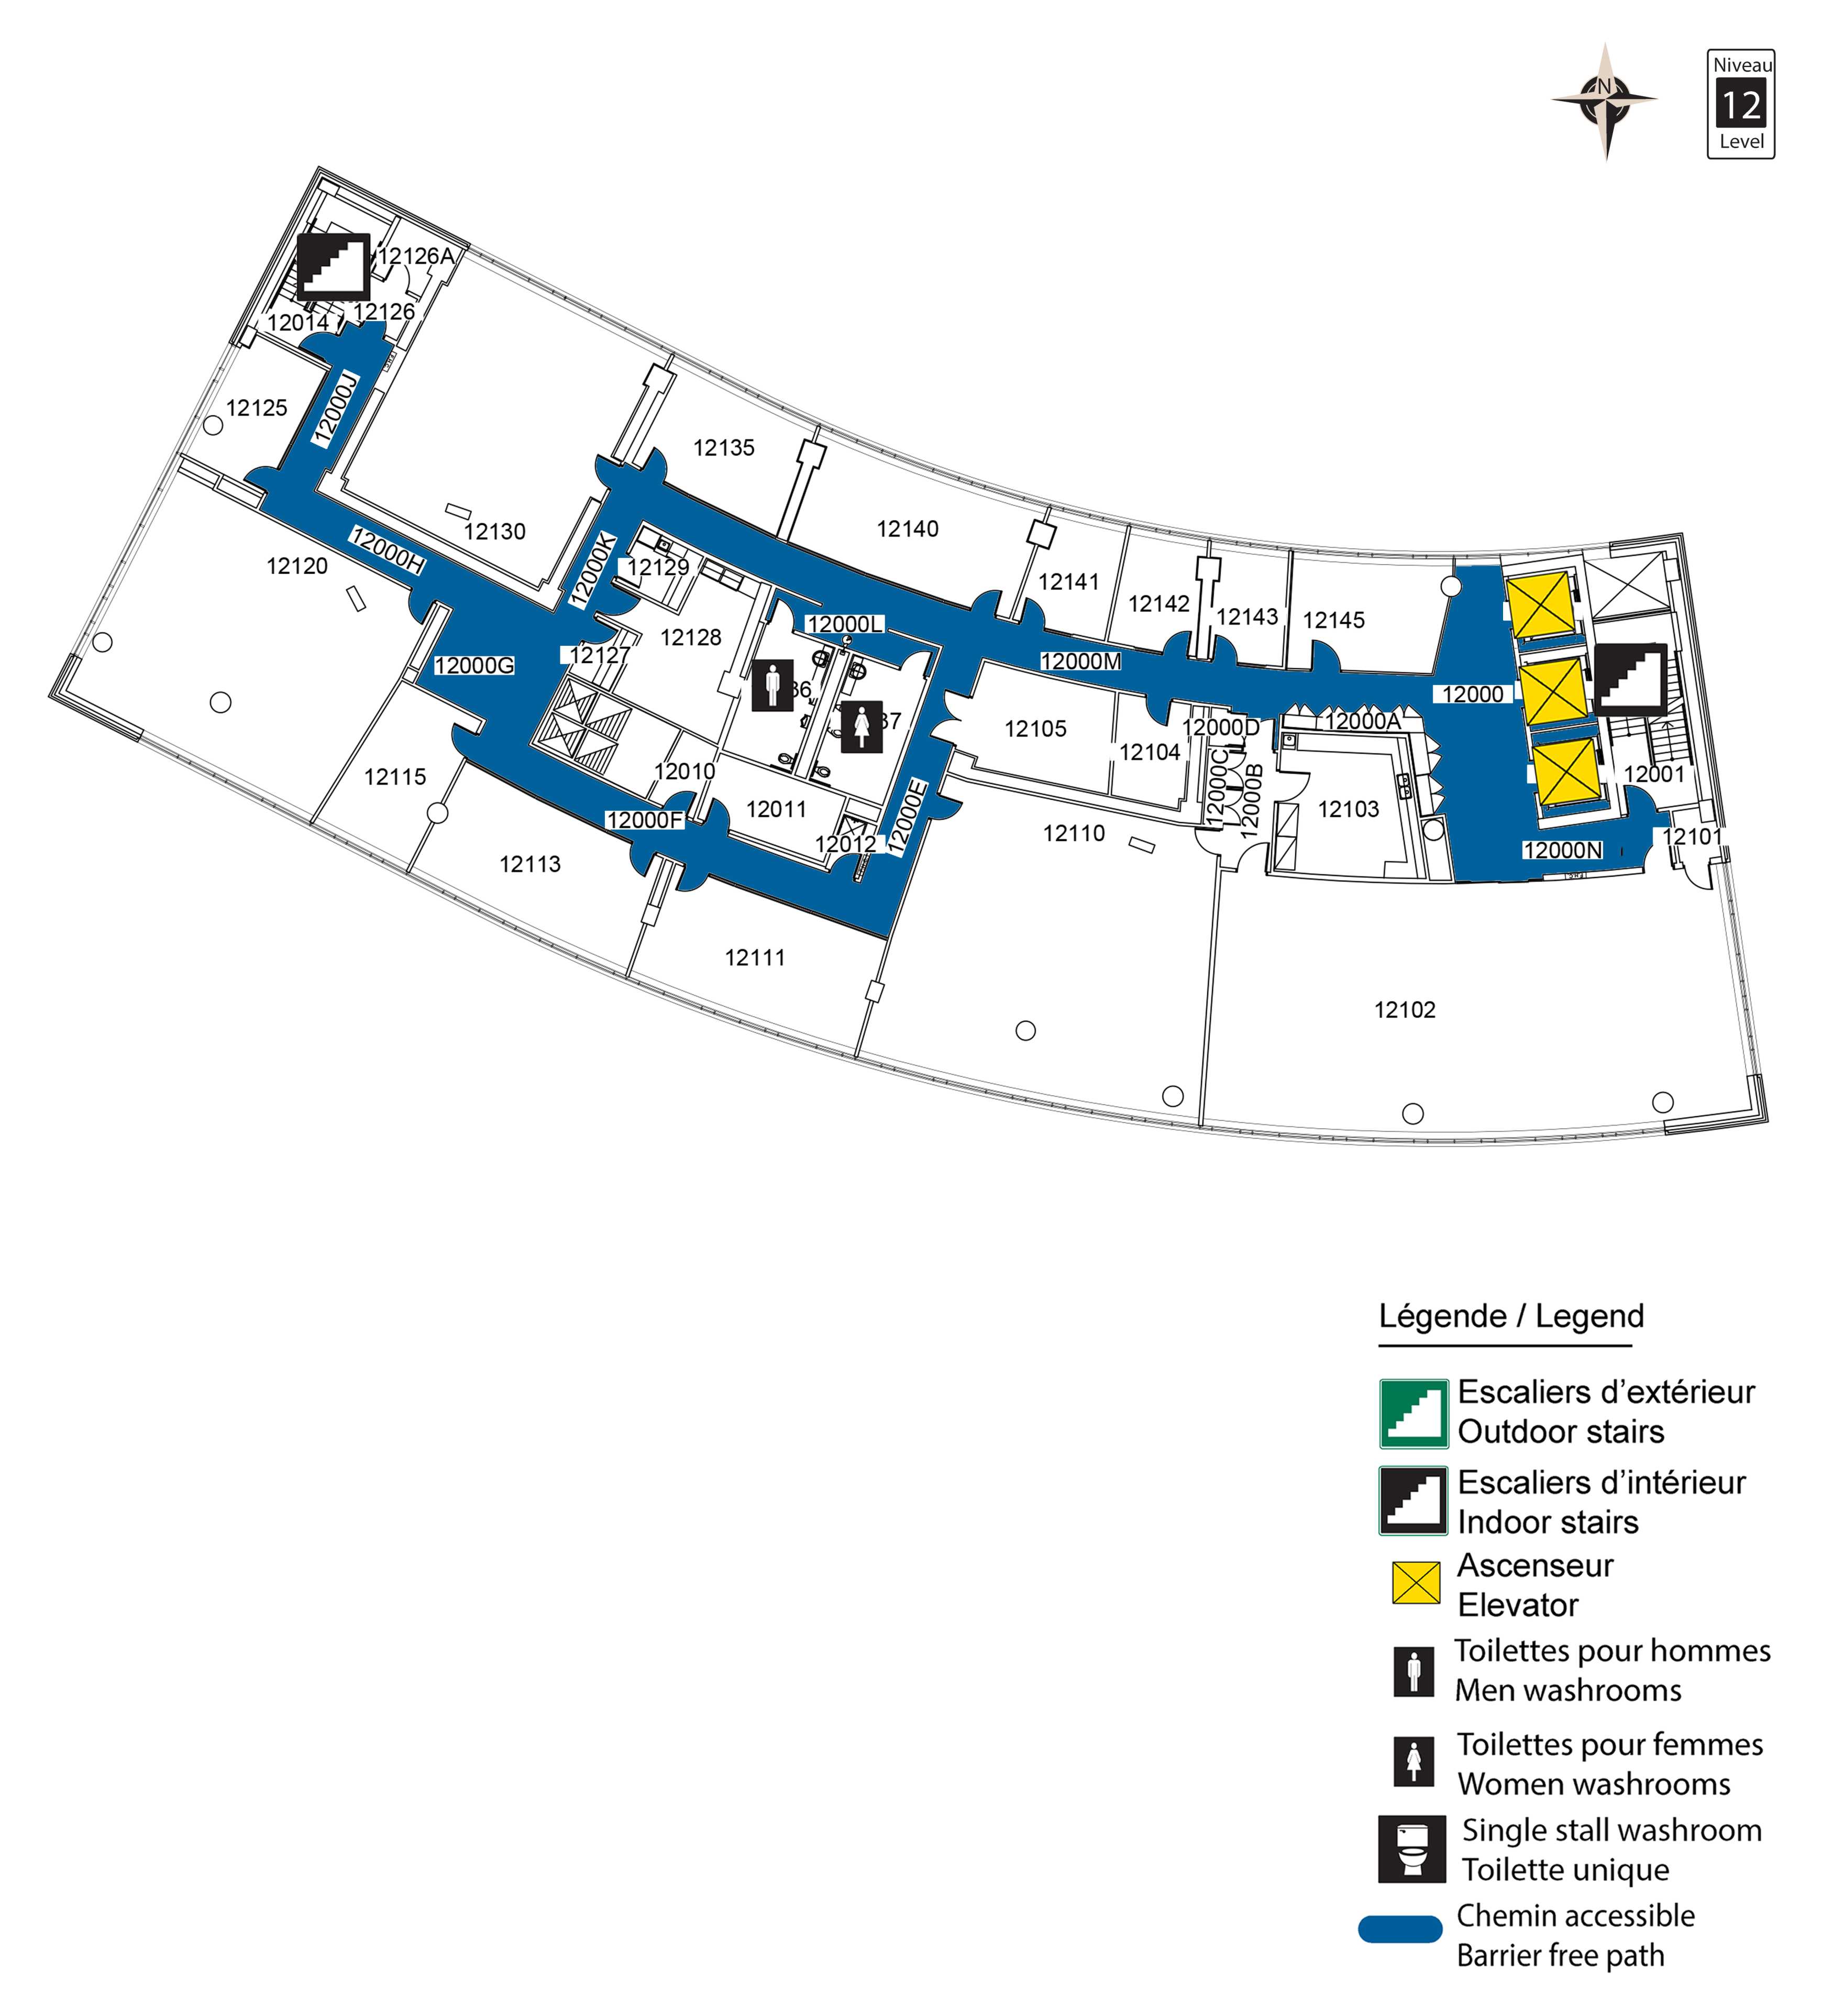 Accessible map - DMS level 12